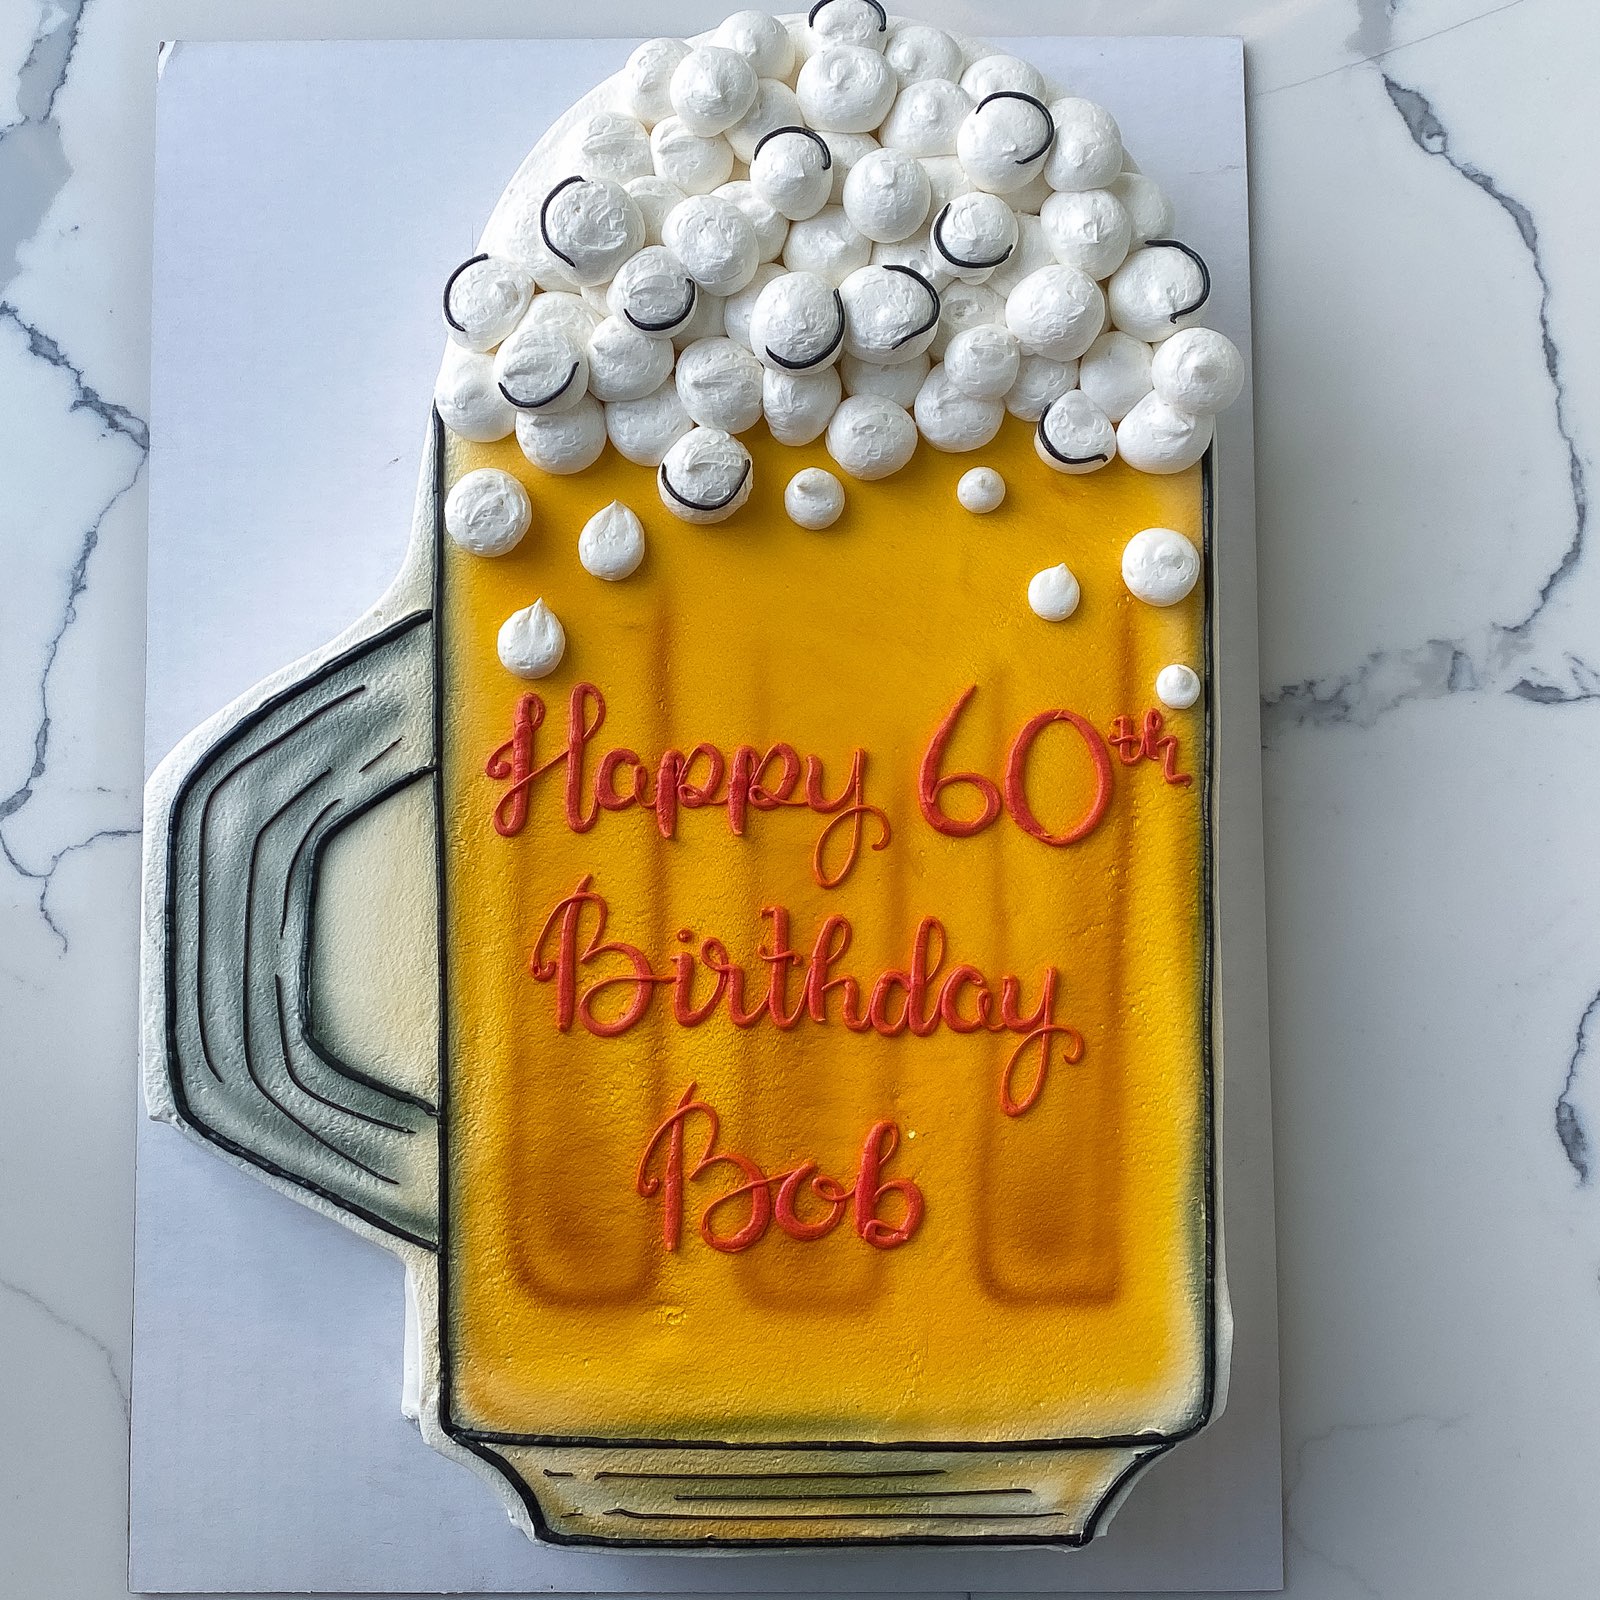 beer can shaped cakes